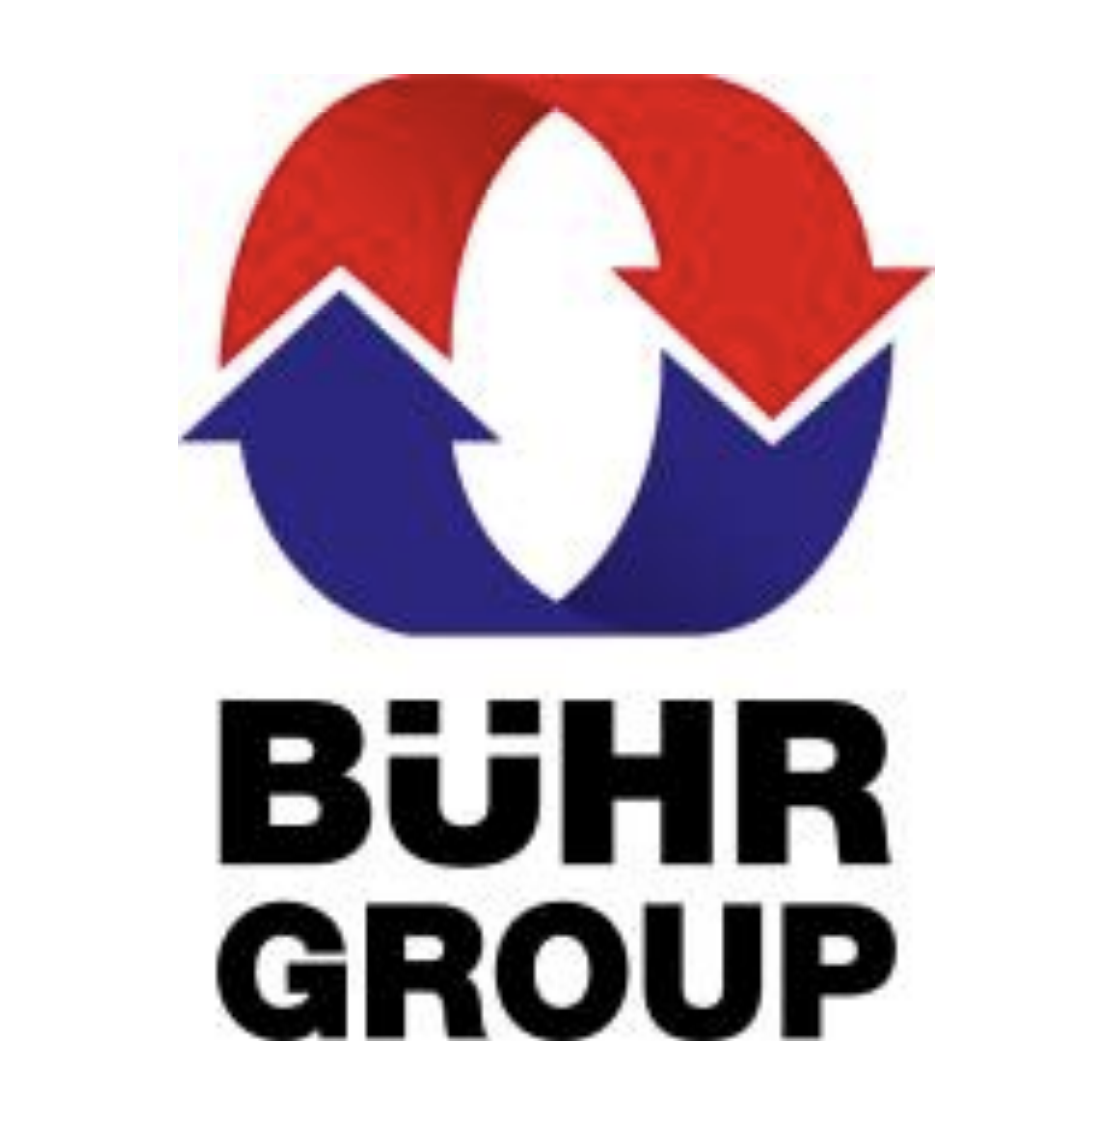 Buhr Group